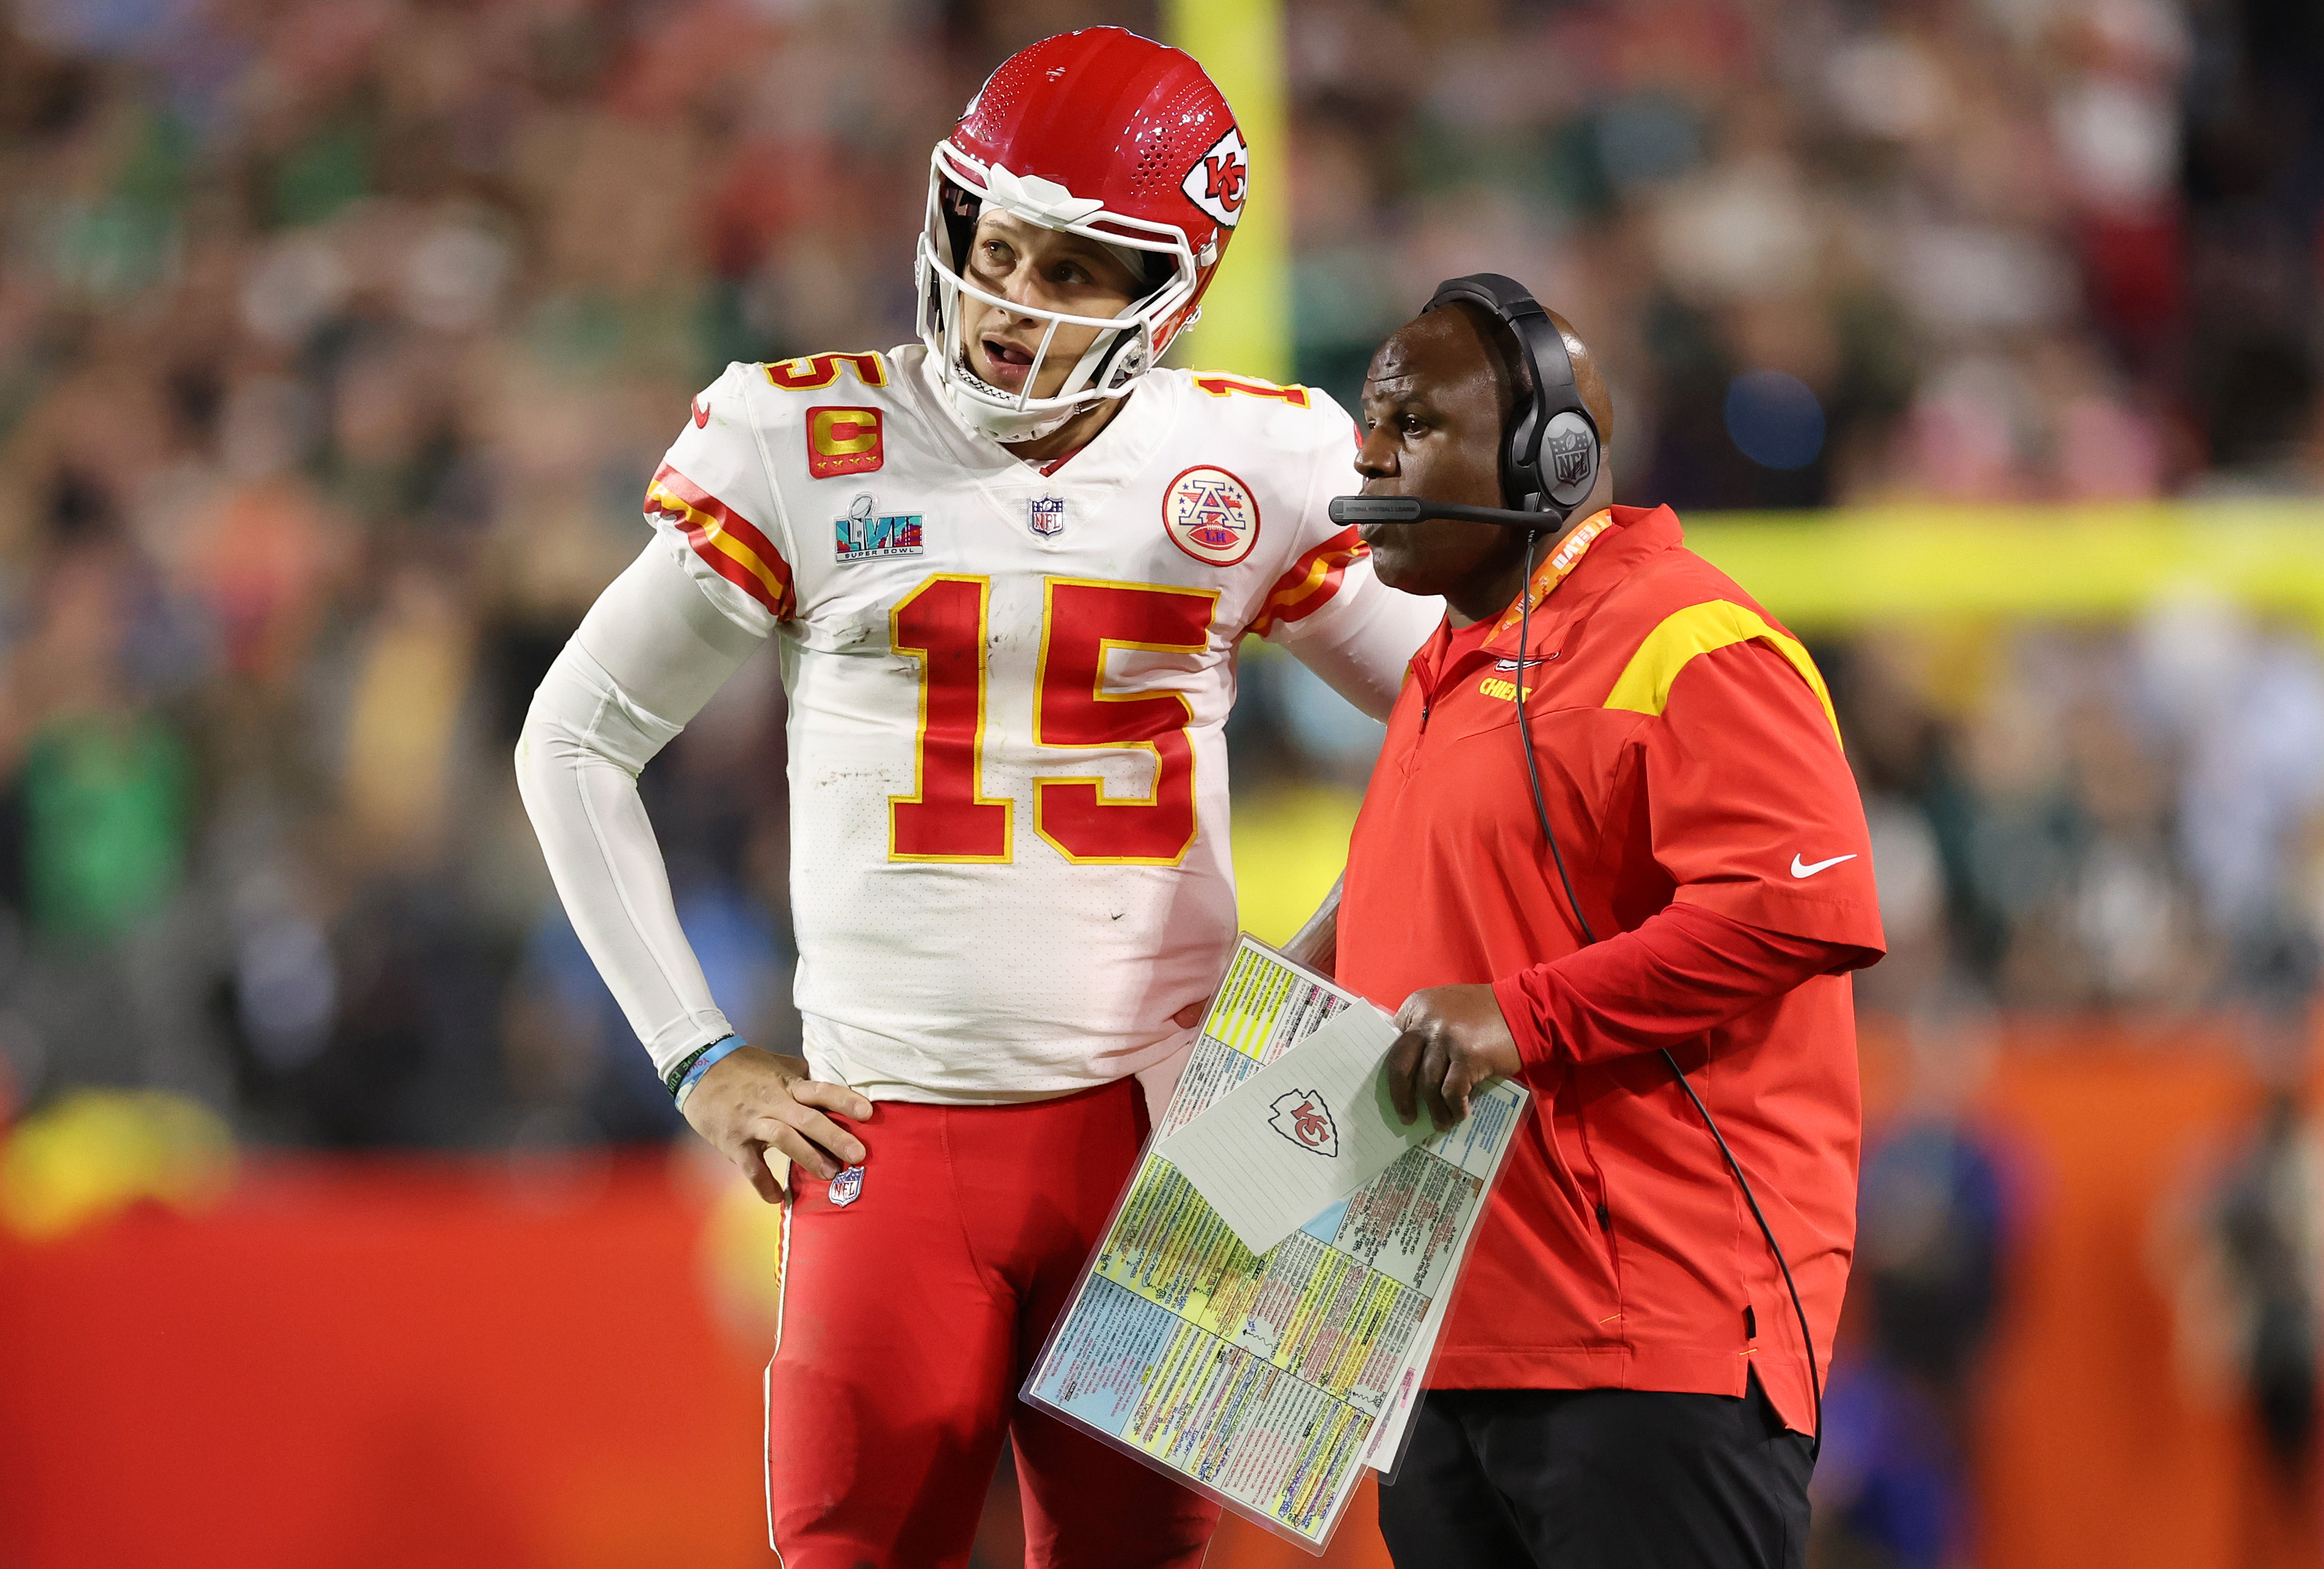 Patrick Mahomes of the Kansas City Chiefs talks with offensive coordinator Eric Bieniemy during the fourth quarter against the Philadelphia Eagles in Super Bowl LVII at State Farm Stadium on February 12, 2023 in Glendale, Arizona.